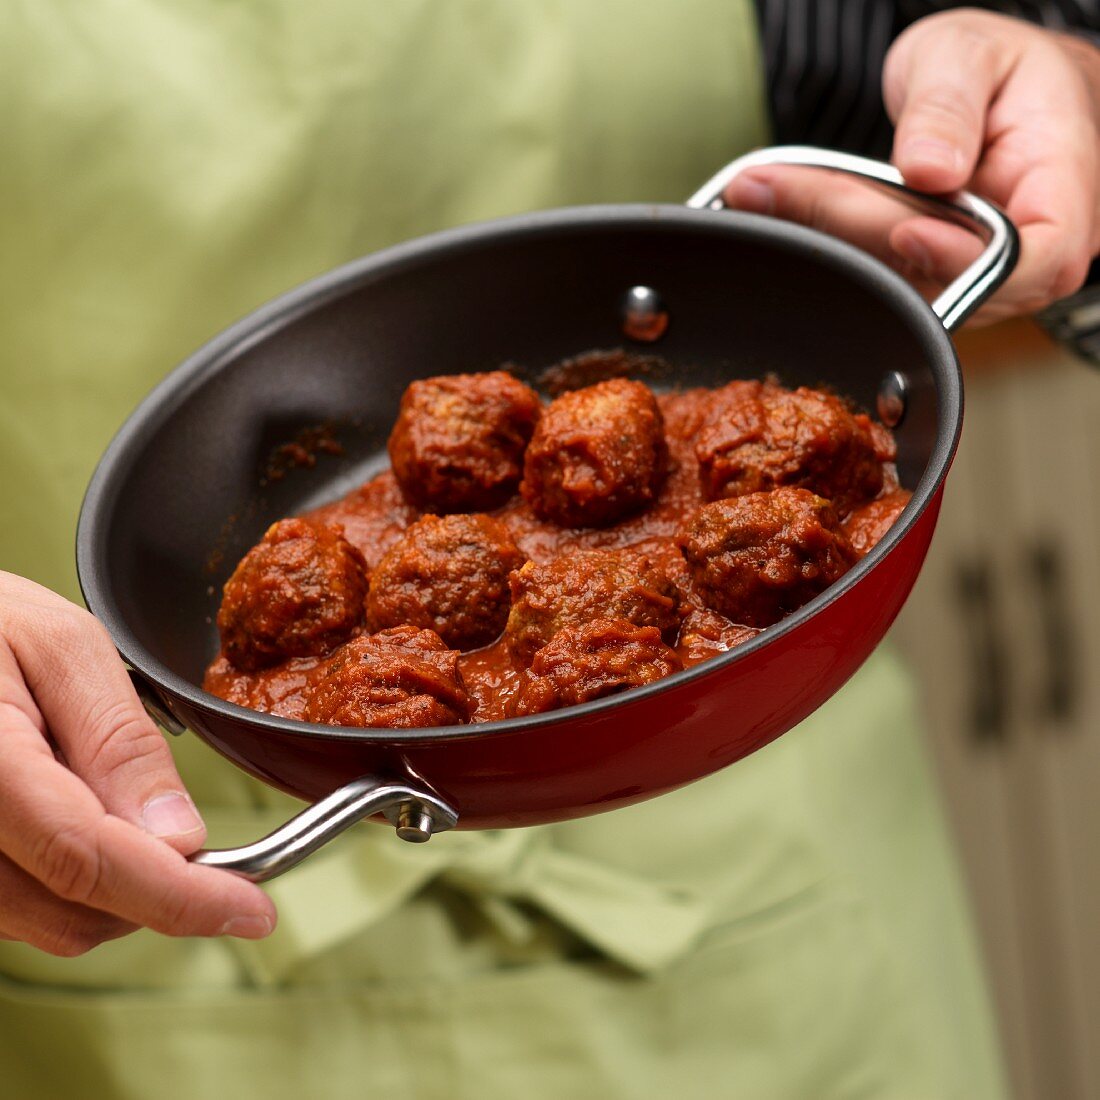 A man holding a pan of meat balls in tomato sauce